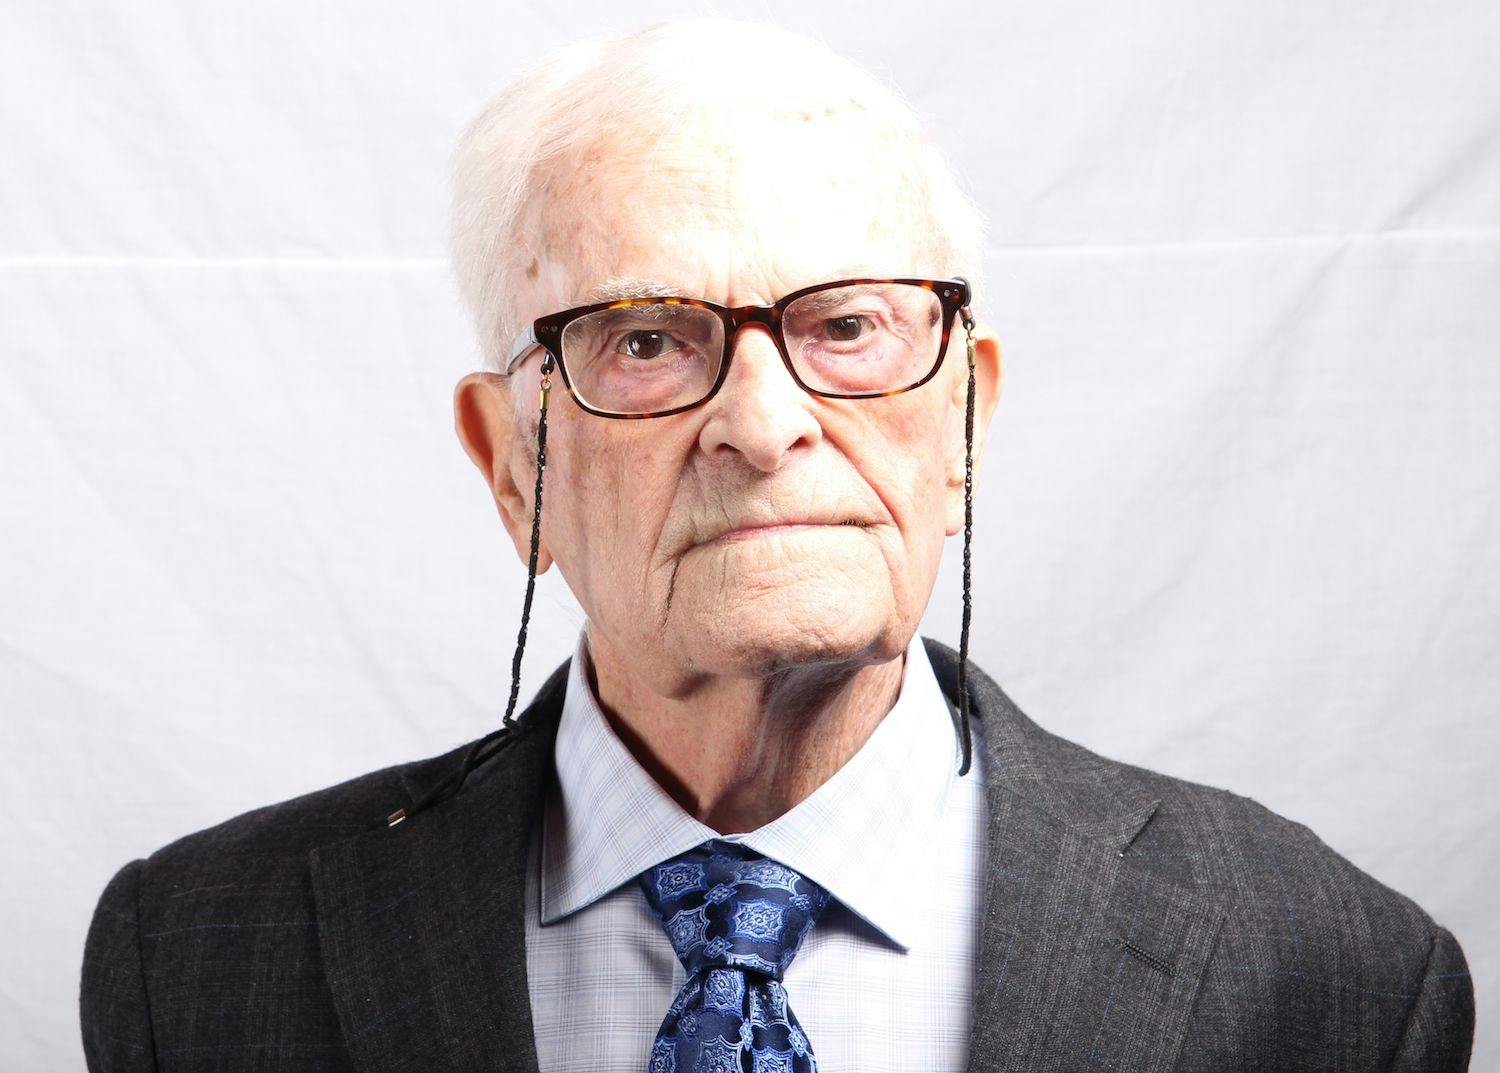 A Tribute to “World's Oldest Rebel” Harry Leslie Smith